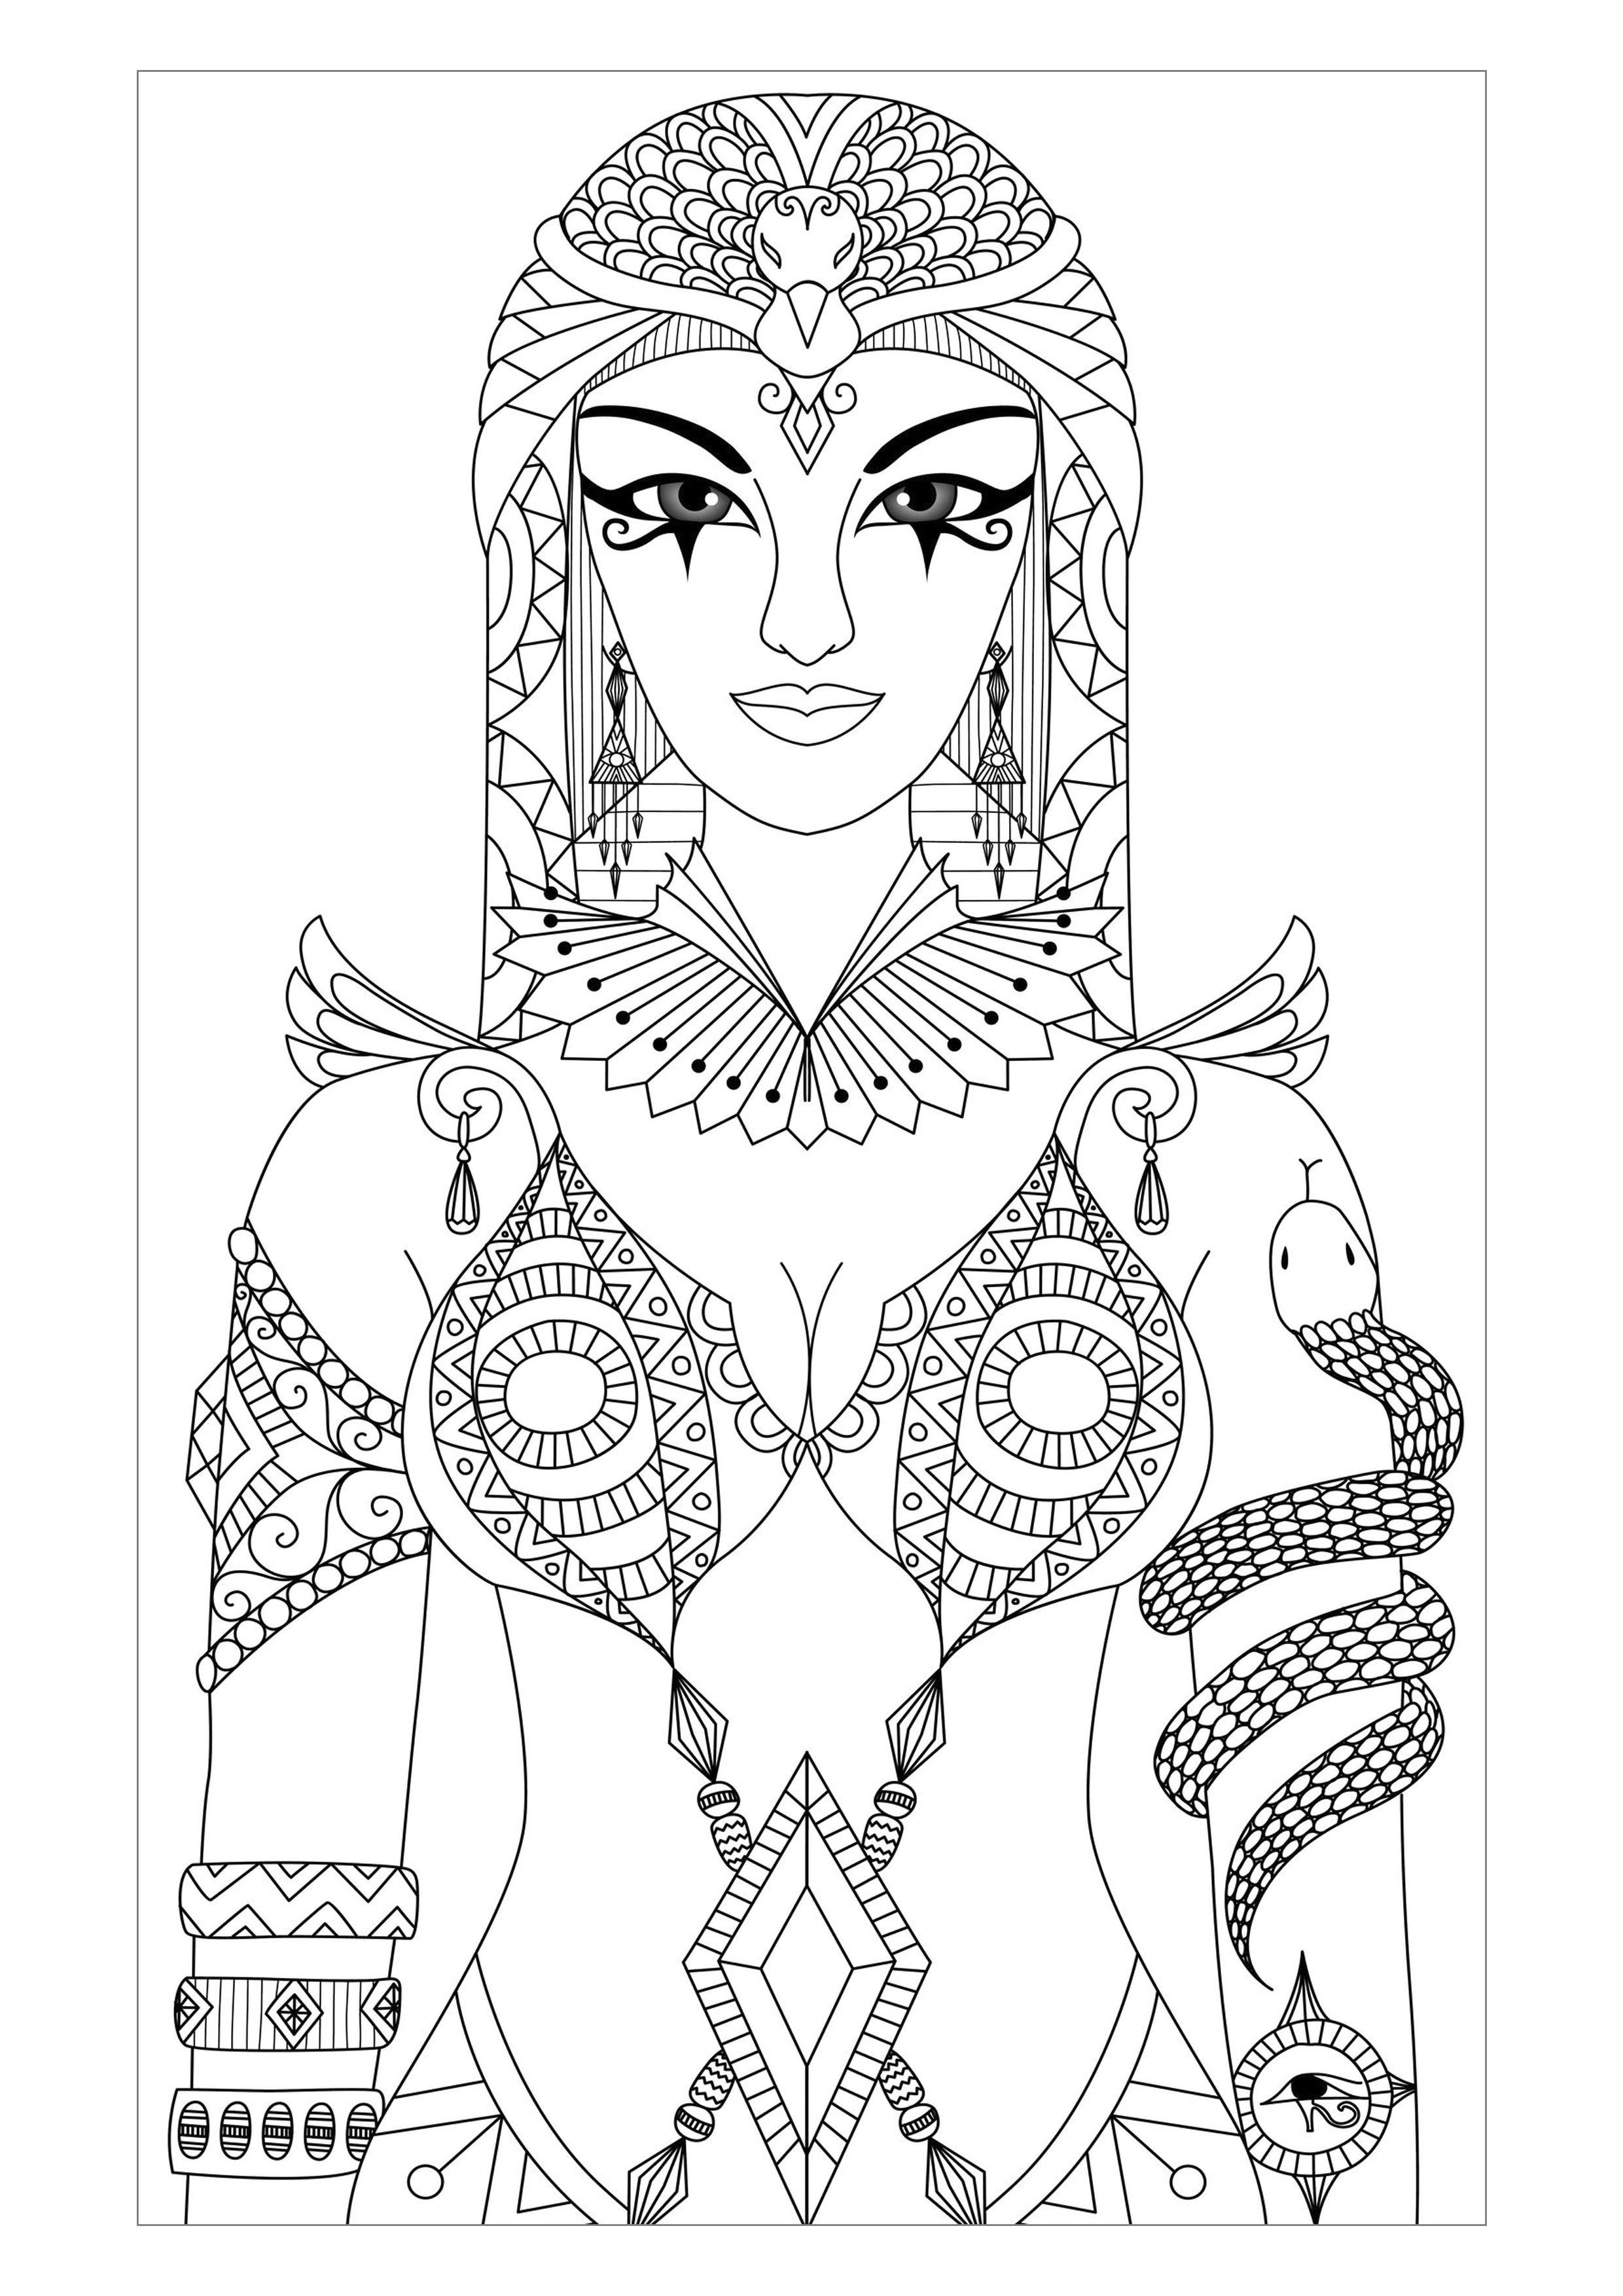 Vampire Coloring Pages For Adults at GetColorings.com | Free printable